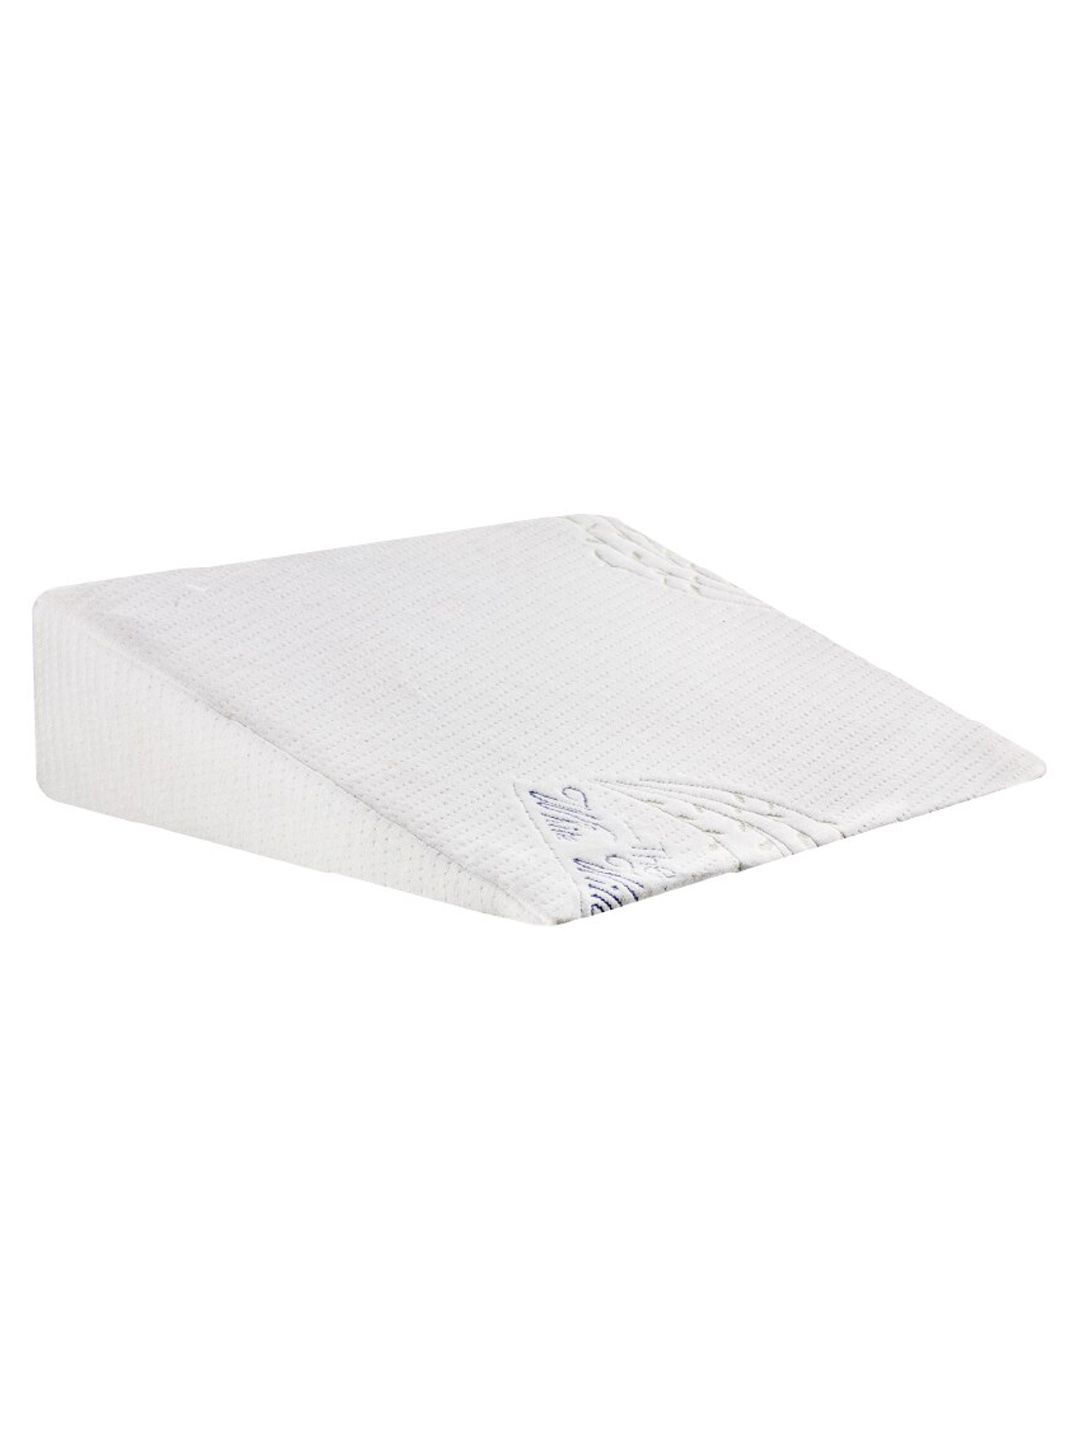 The White Willow White Multi Cooling Gel Memory Foam Wedge Pillow Price in India